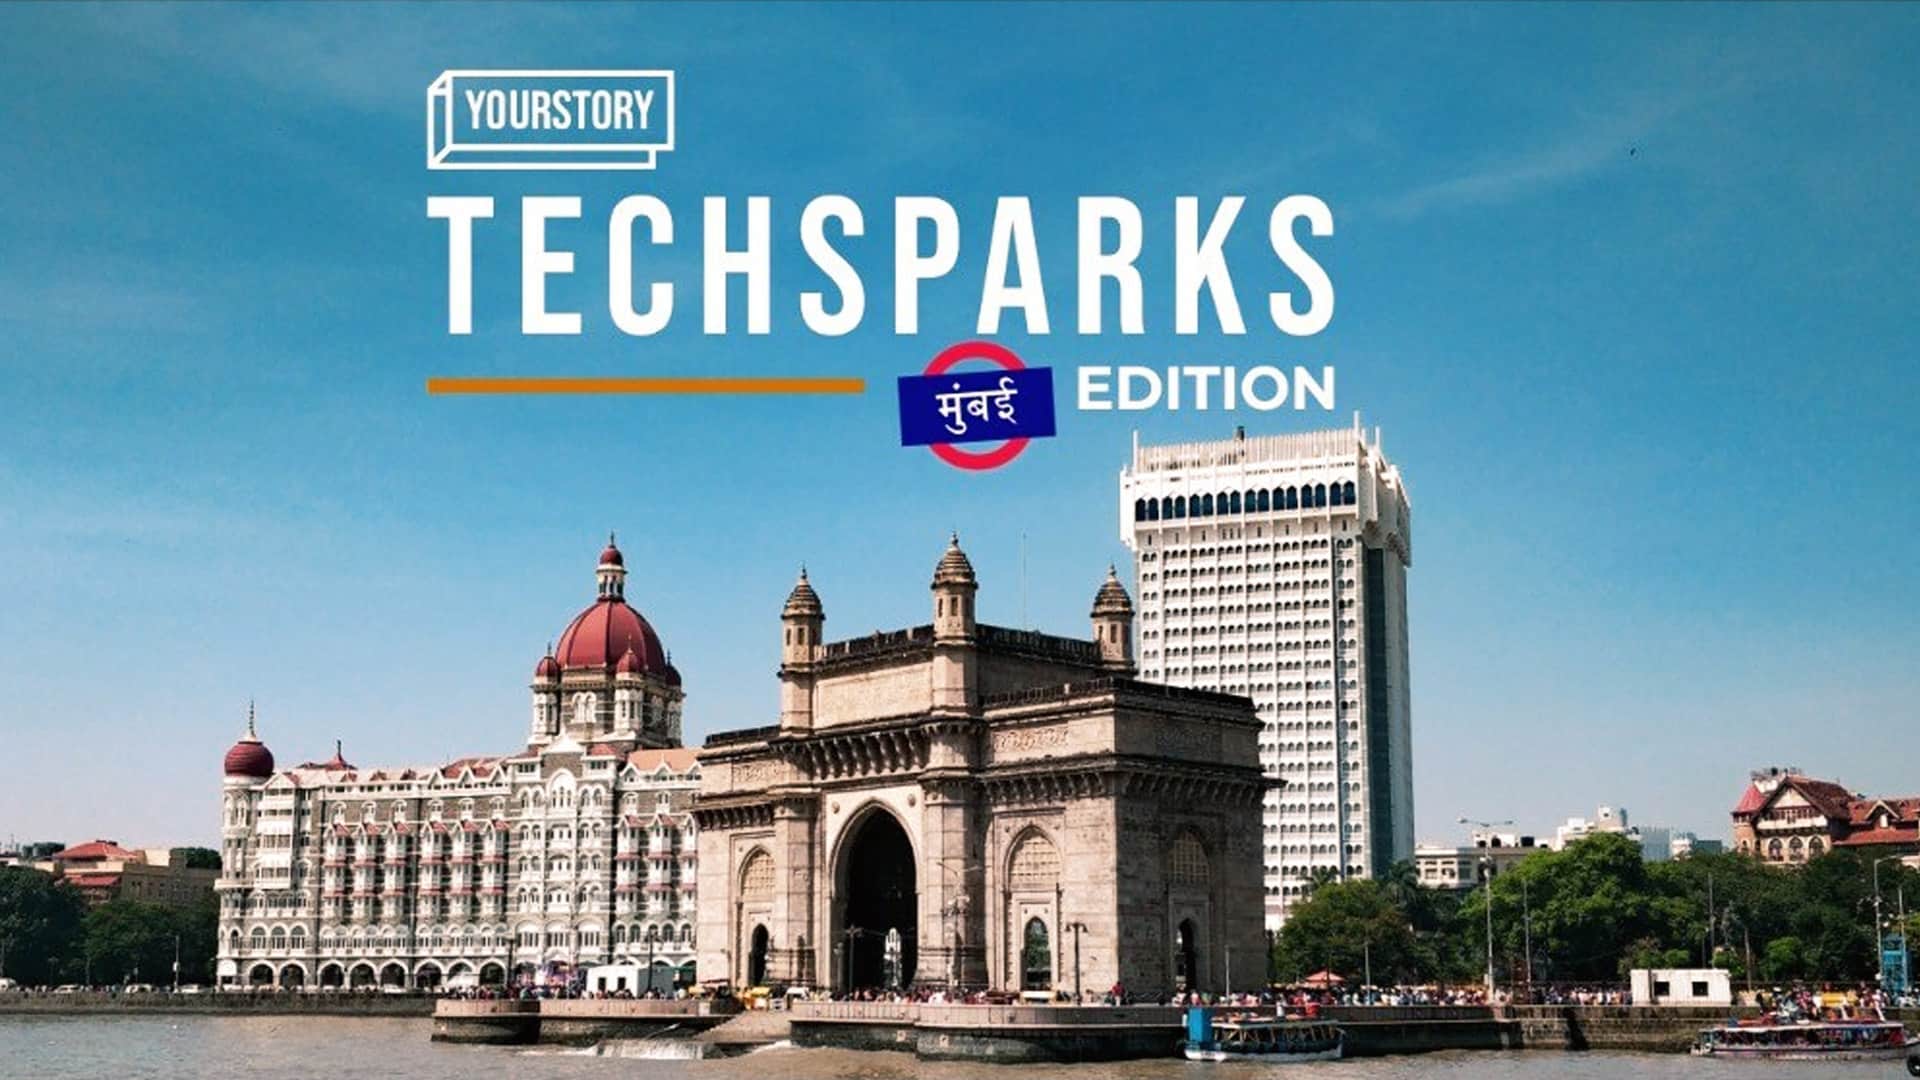 Unicorn founders, creators, influencers to come together at TechSparks Mumbai